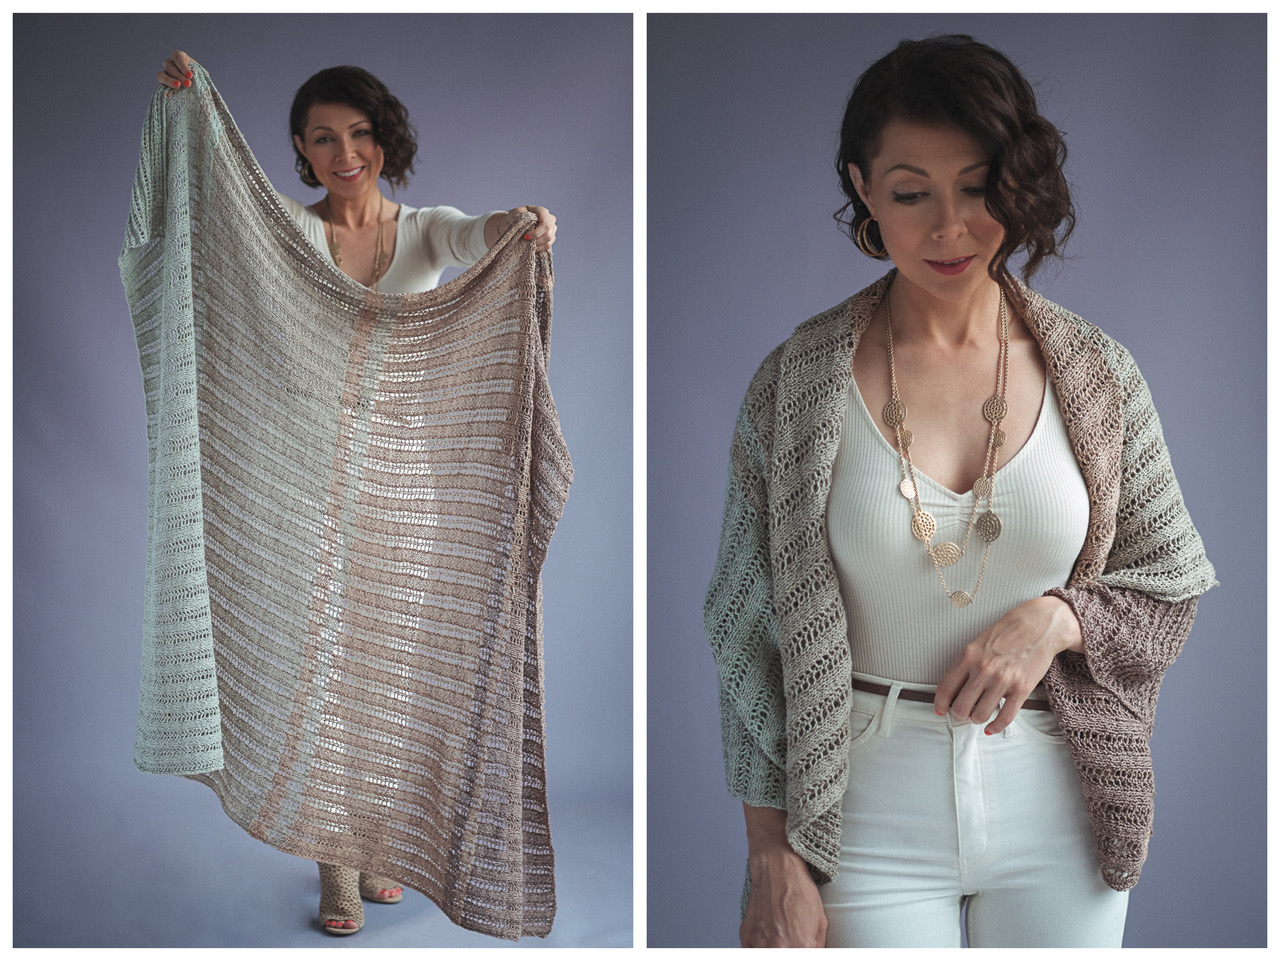 love and lace free knitted wrap pattern - shawl, blanket